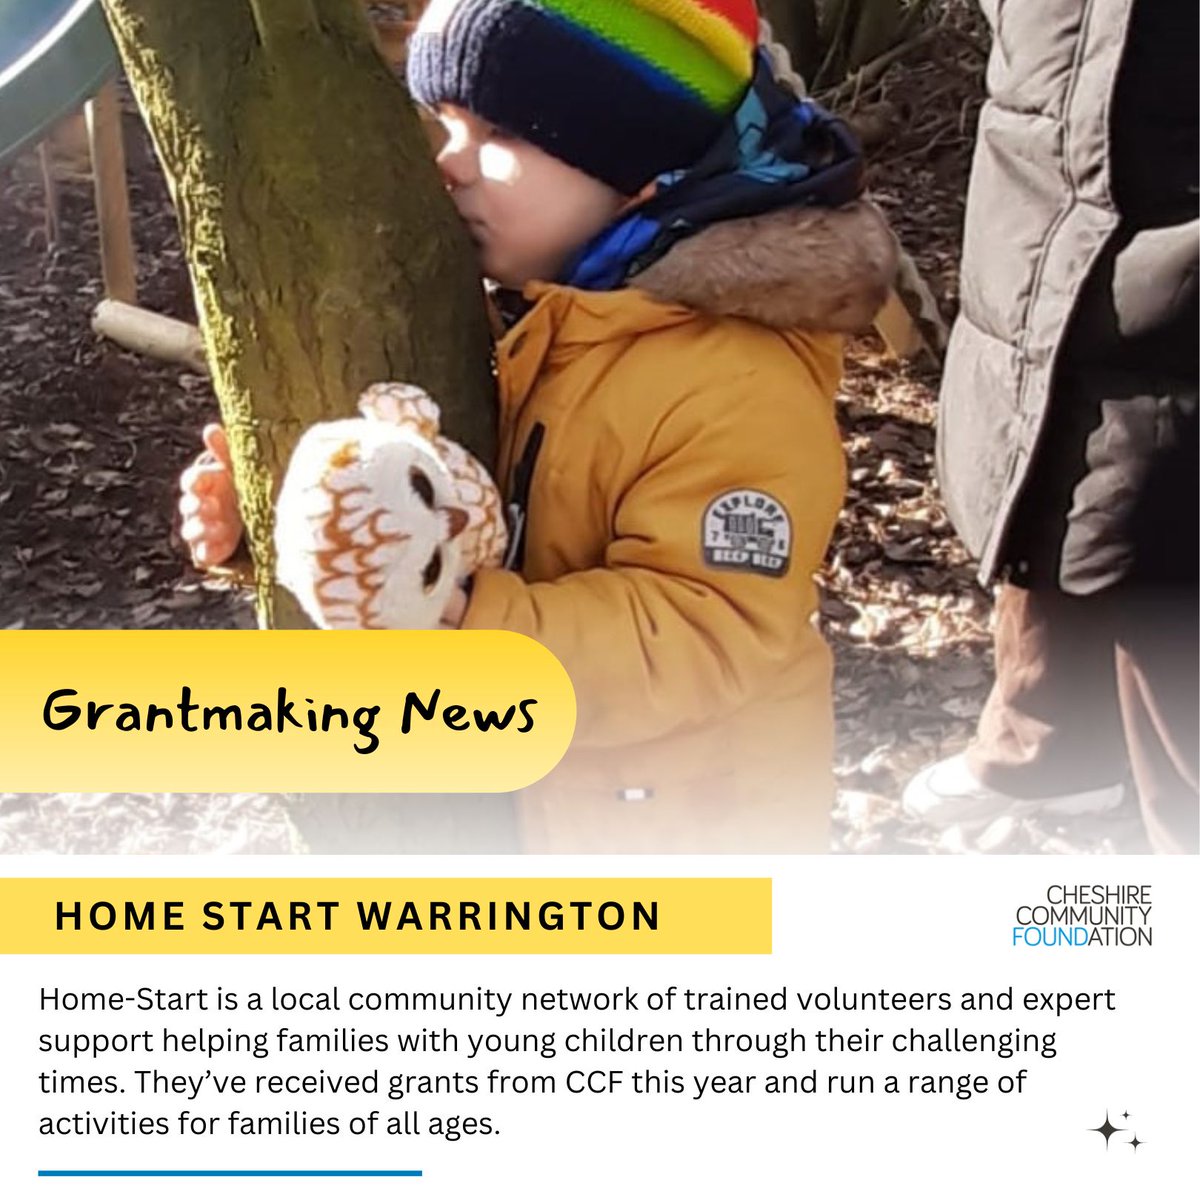 We’re proud to award grants to so many wonderful charities & organisations in Cheshire & Warrington. In the spotlight this week is Home Start Warrington…